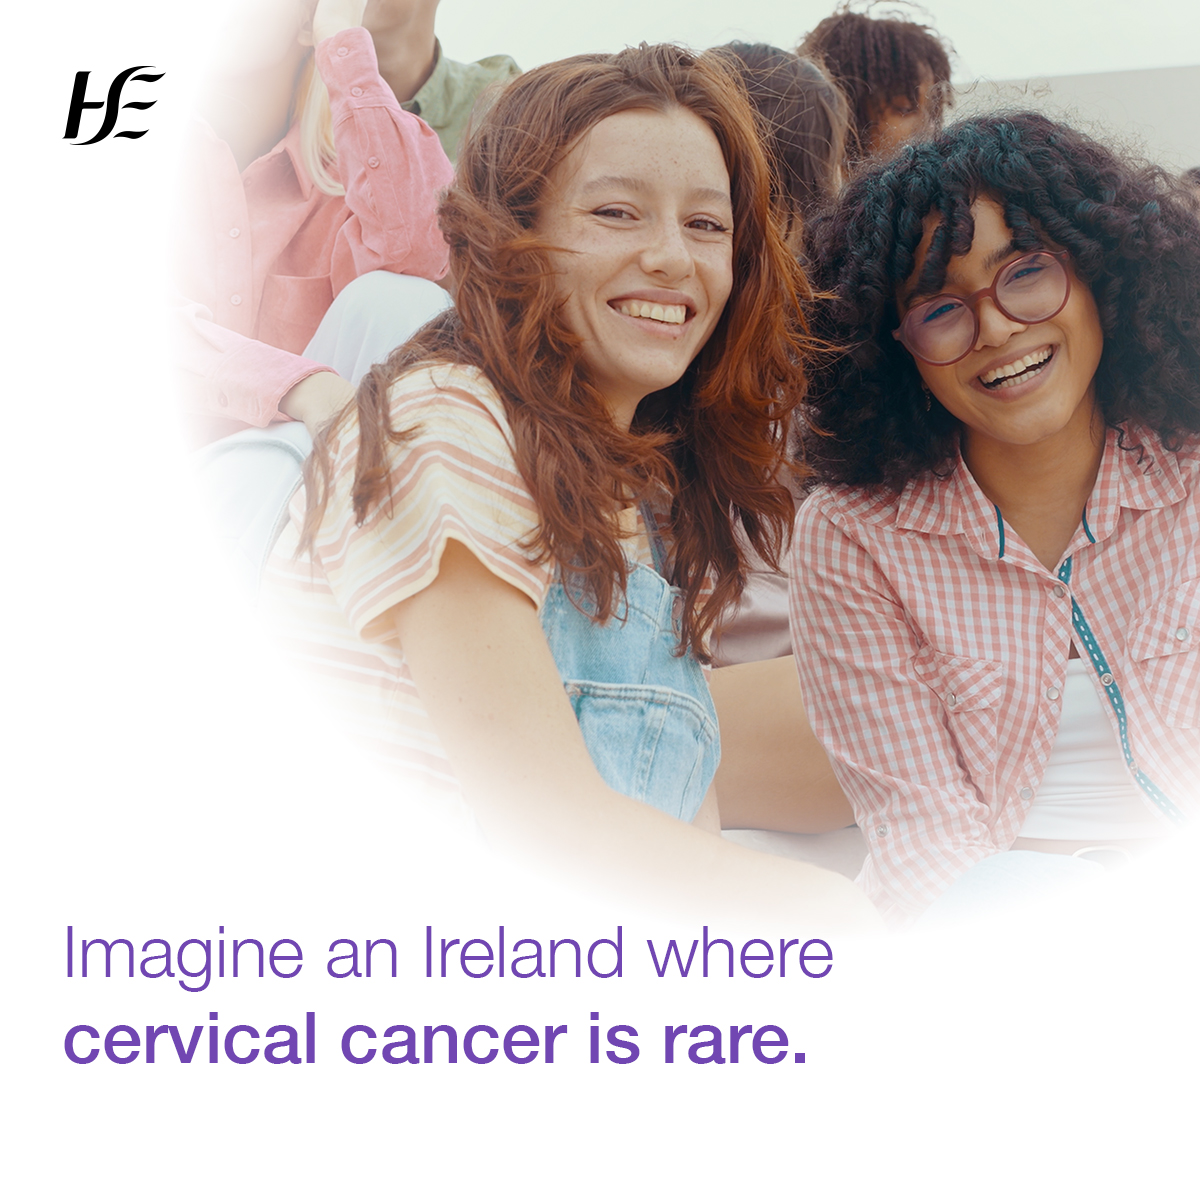 Calling all third-level students… Add your voice to a national action plan to eliminate cervical cancer in Ireland. Complete our short survey and be part of it: tinyurl.com/cce-survey-mak… #TogetherTowardsElimination RT @tcddublin @UL